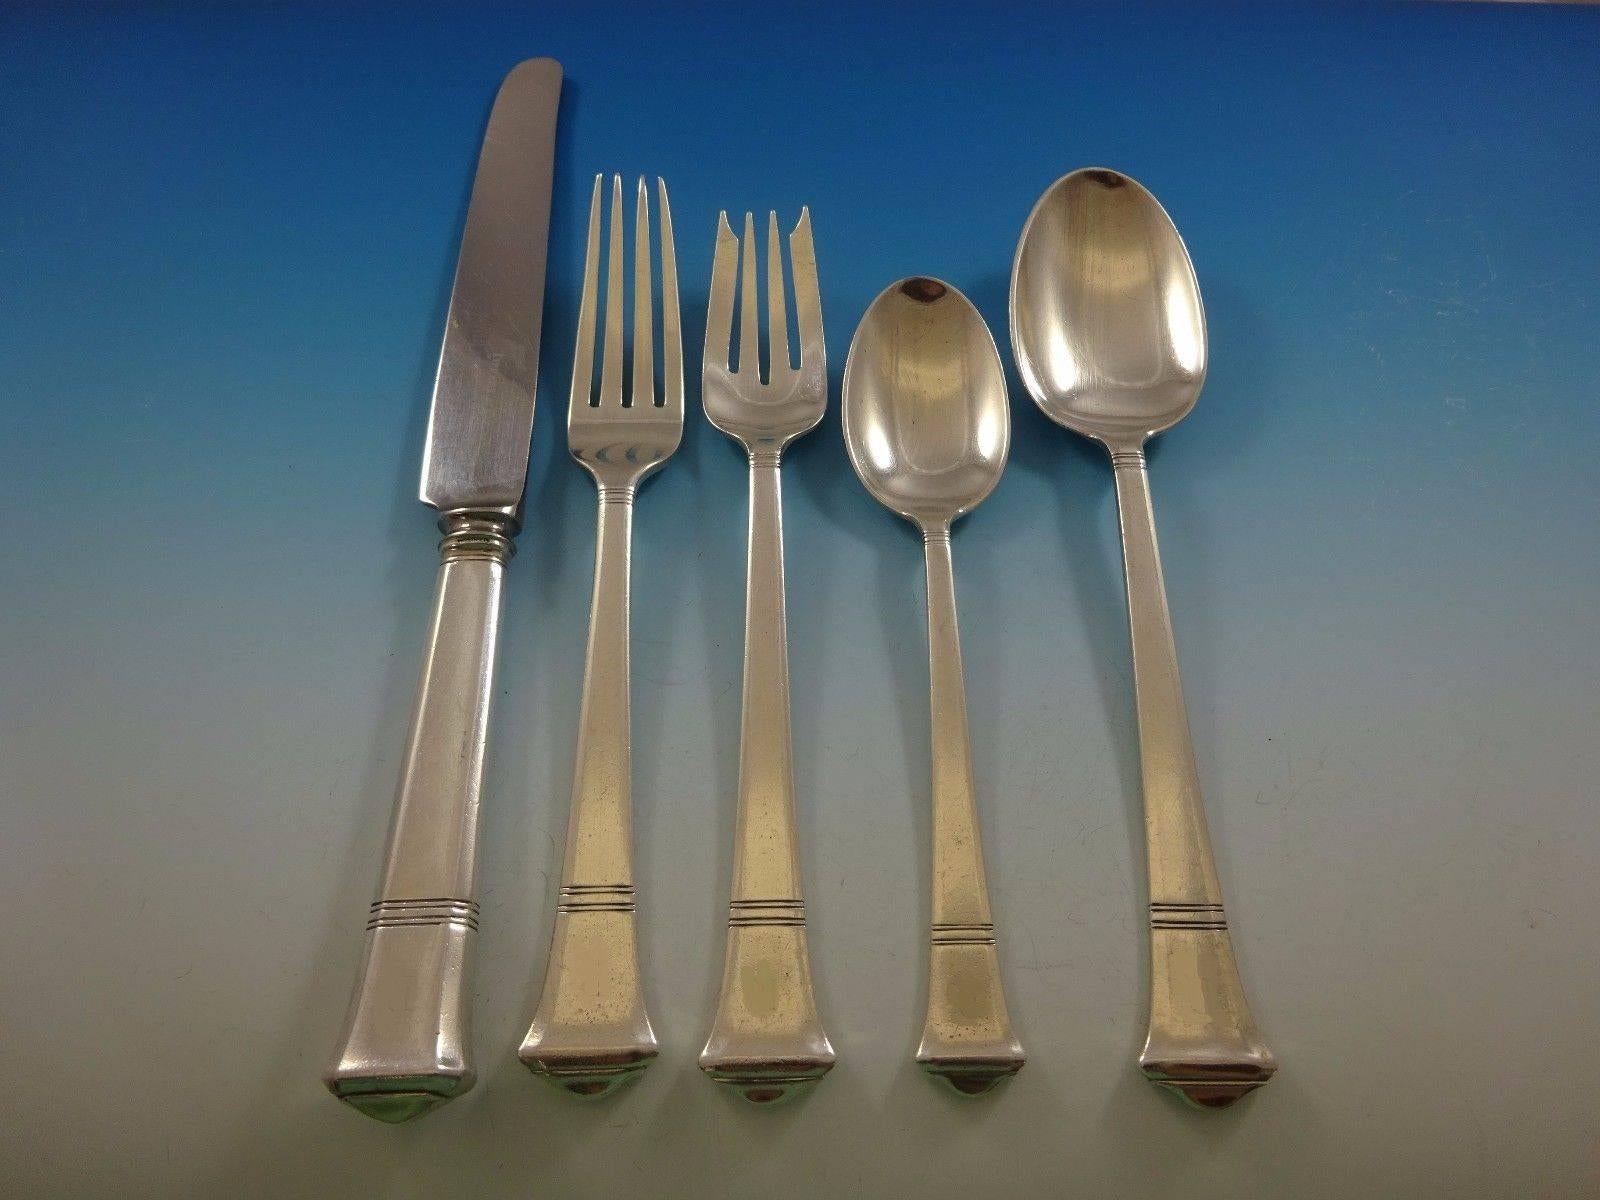 Designed with an eye for balance and proportion, each piece of Tiffany & Co. flatware is a masterpiece of form and function.

Huge Windham by Tiffany & Co. sterling silver flatware set of 159 pieces. Great starter set! This set includes:

12 knives,